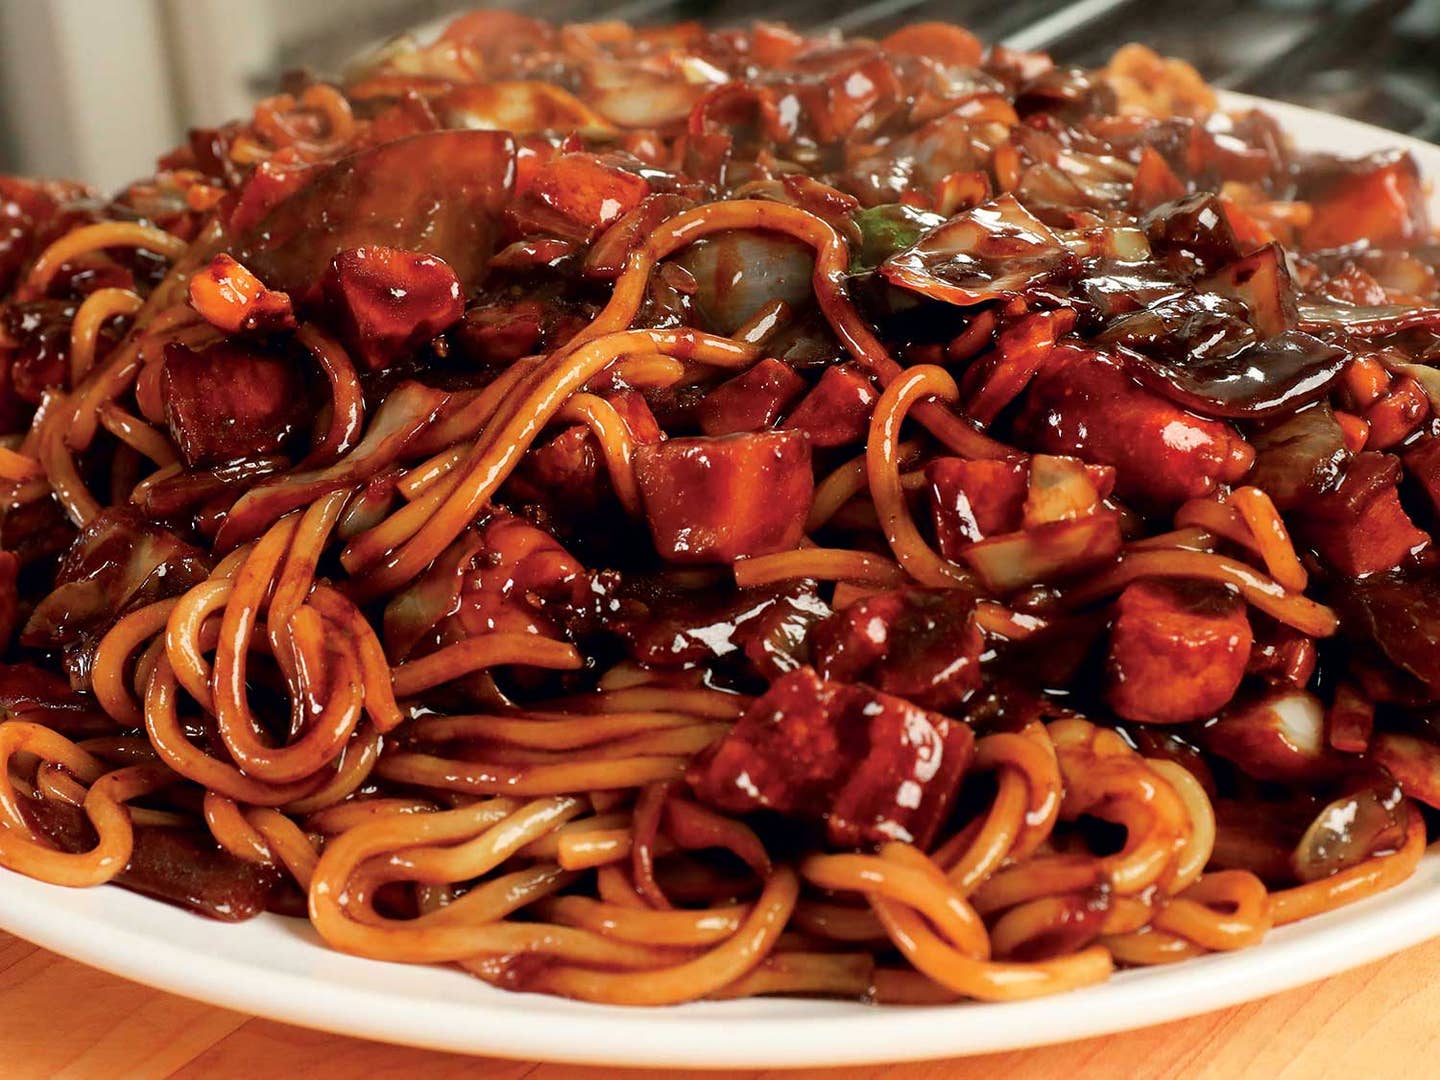 These Black Bean Noodles Are Korea’s Most Popular Takeout Dish